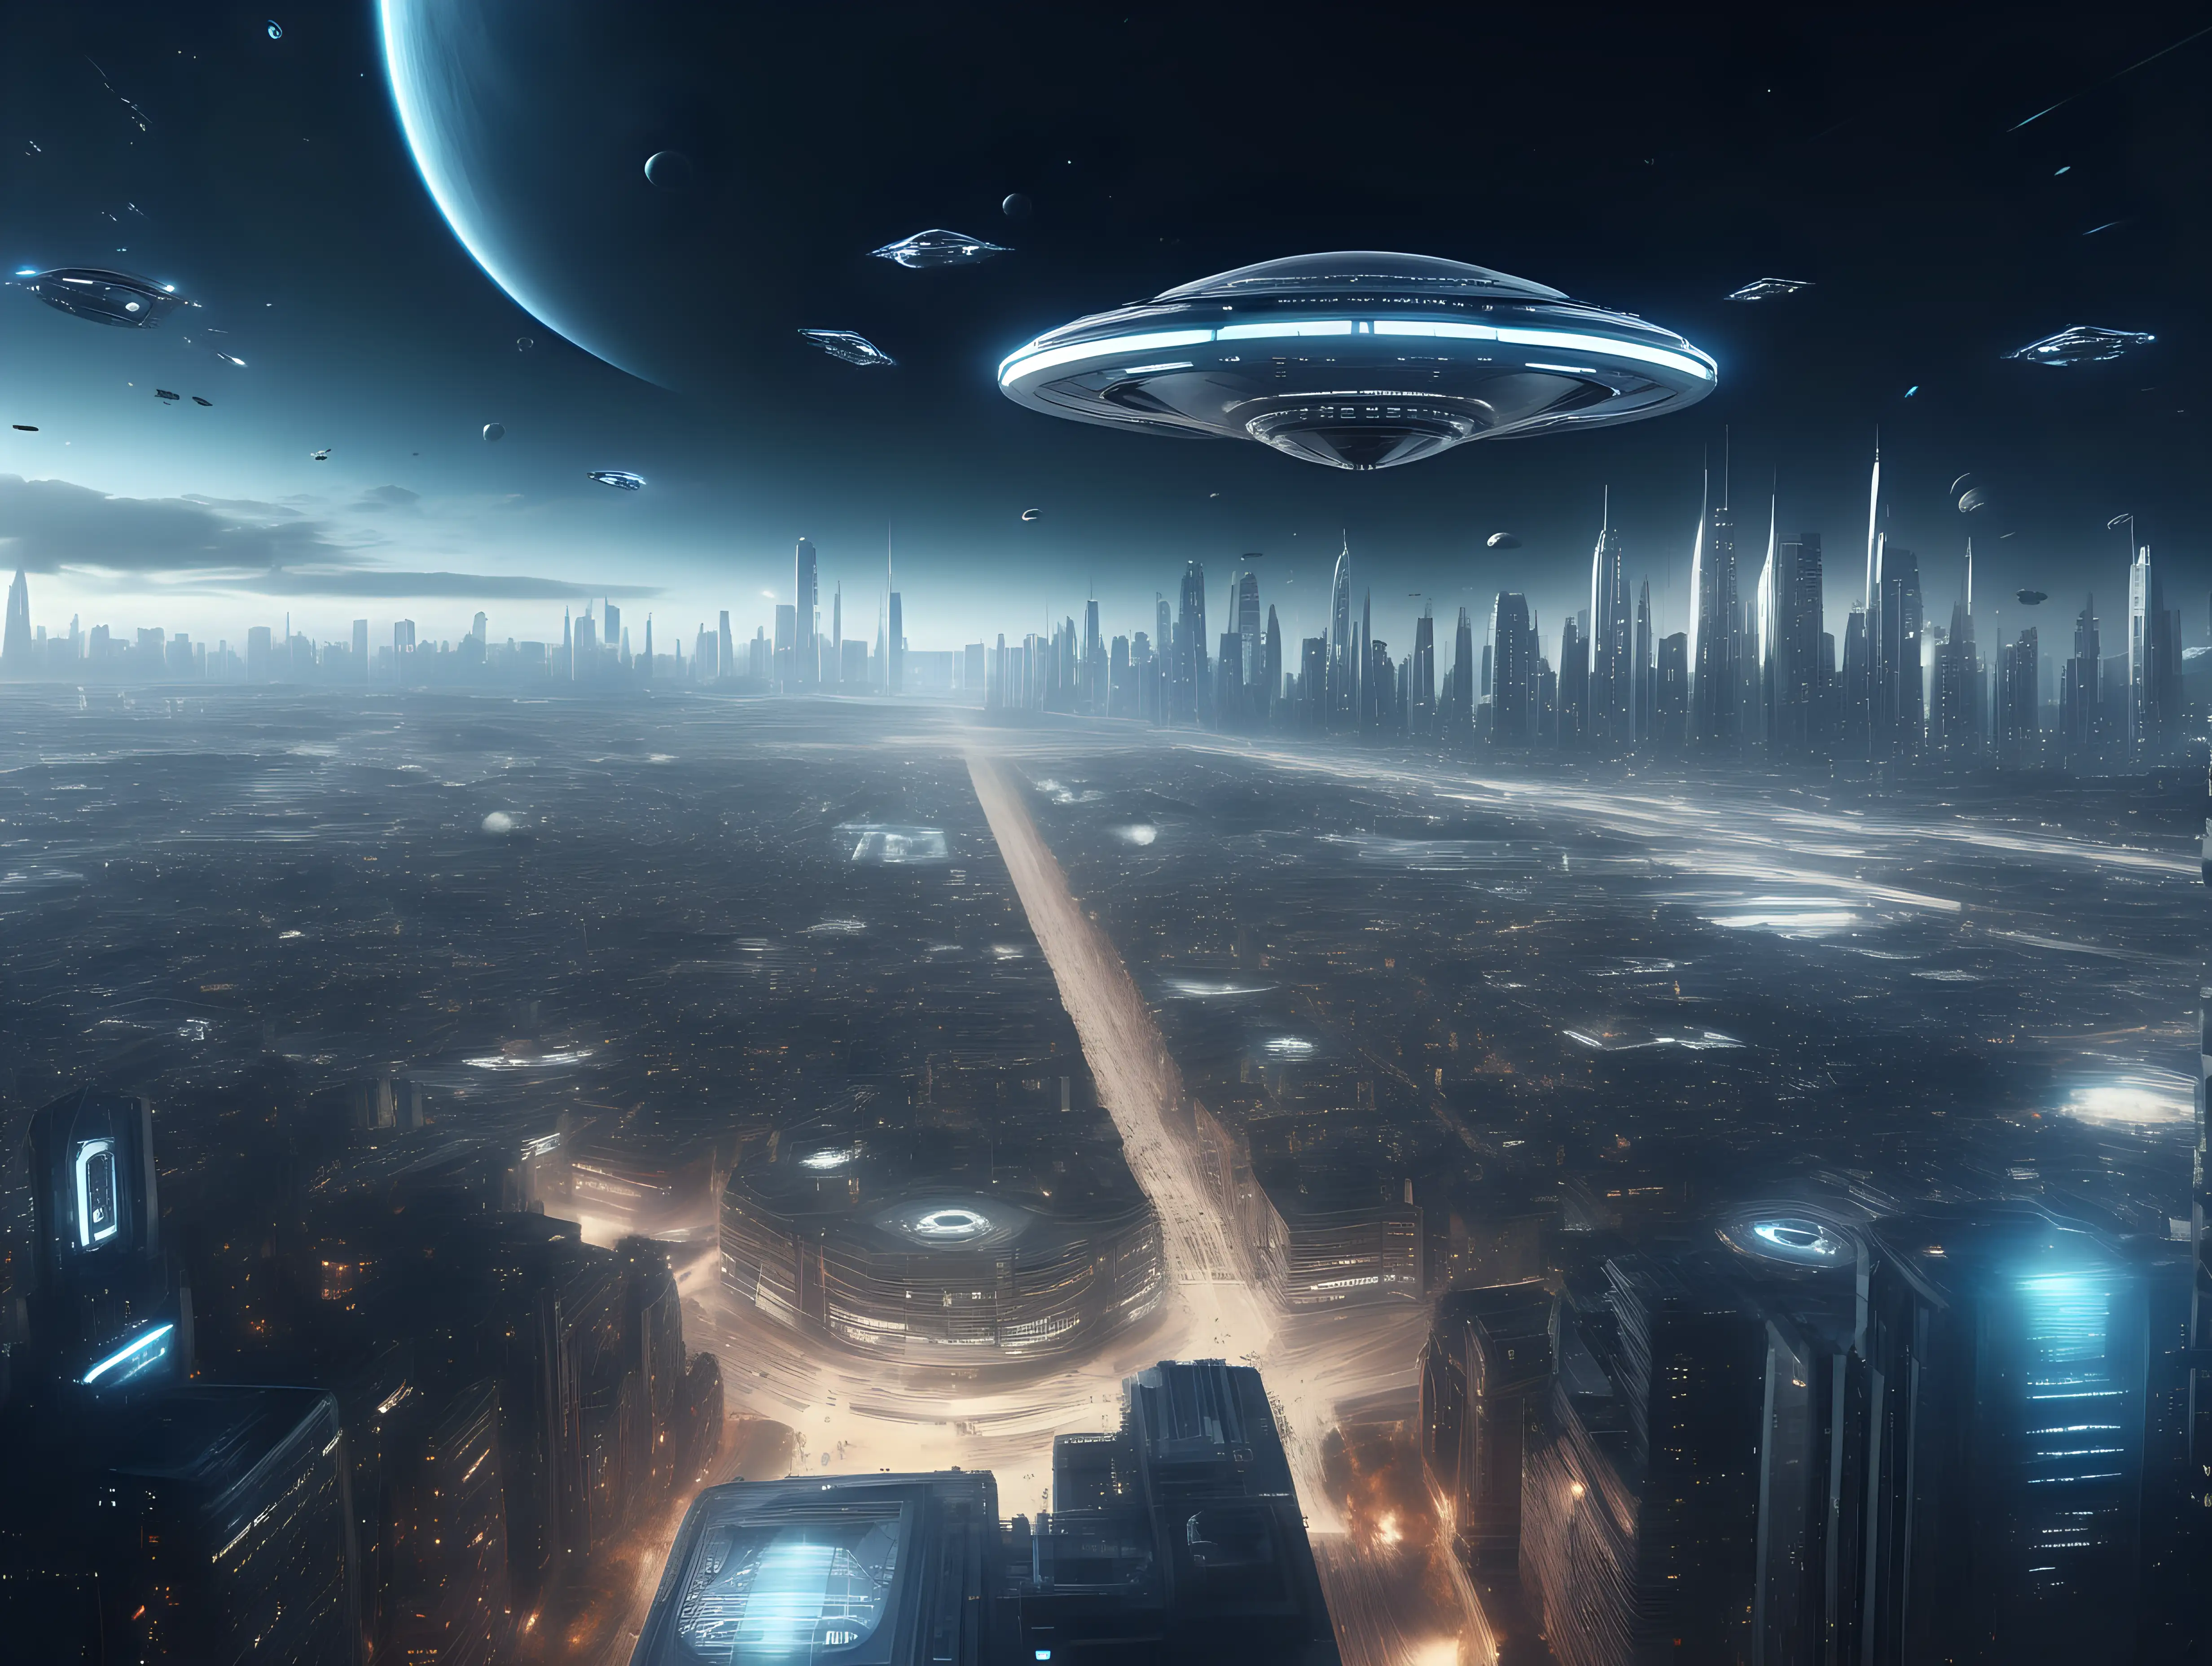 ultra-realistic high resolution and highly detailed photo with depth-perception of a futuristic city in the background with a large space ship full of lights hovering above the city 